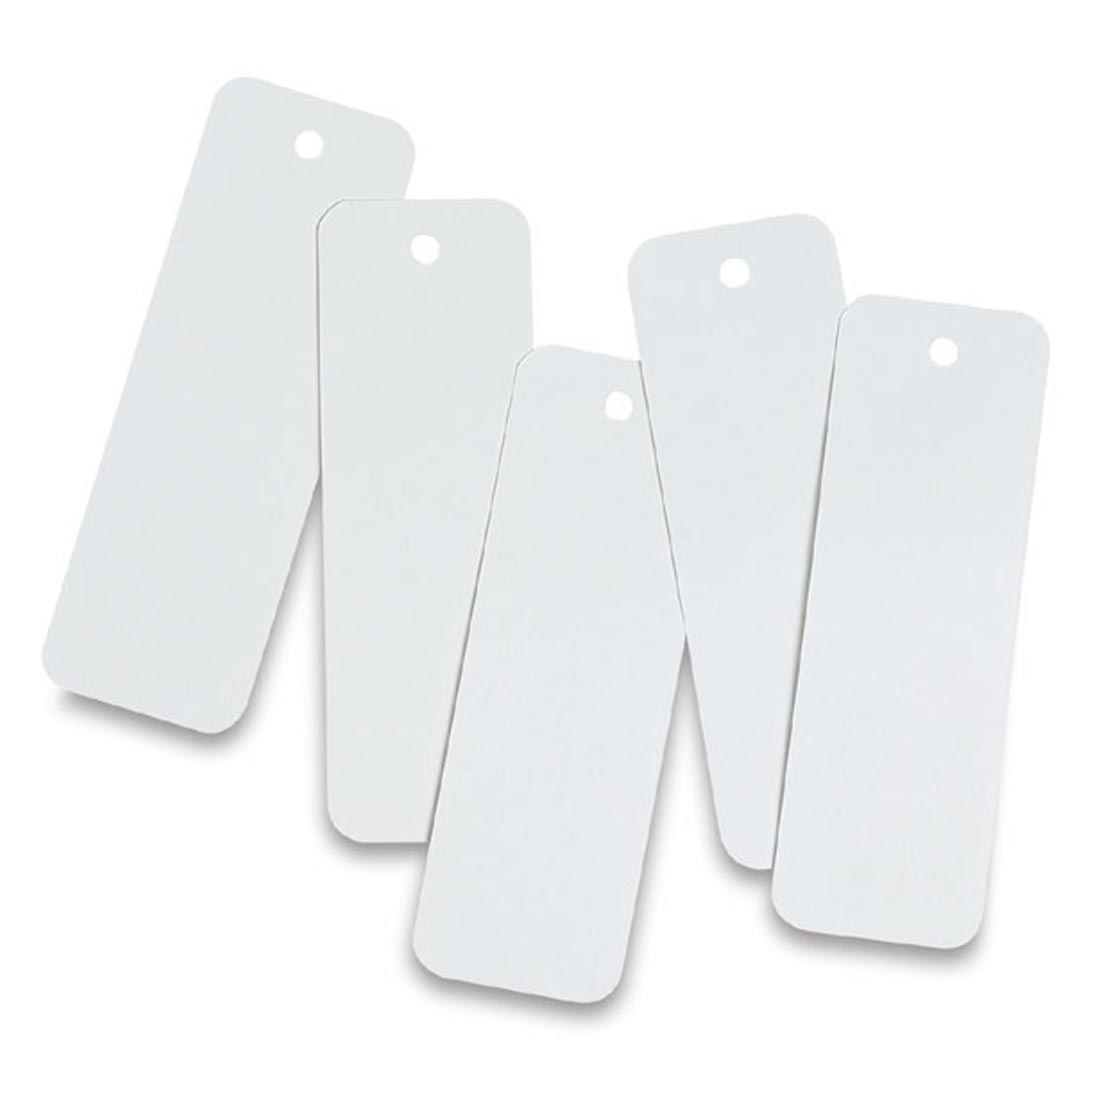 Five Blank White Bookmarks